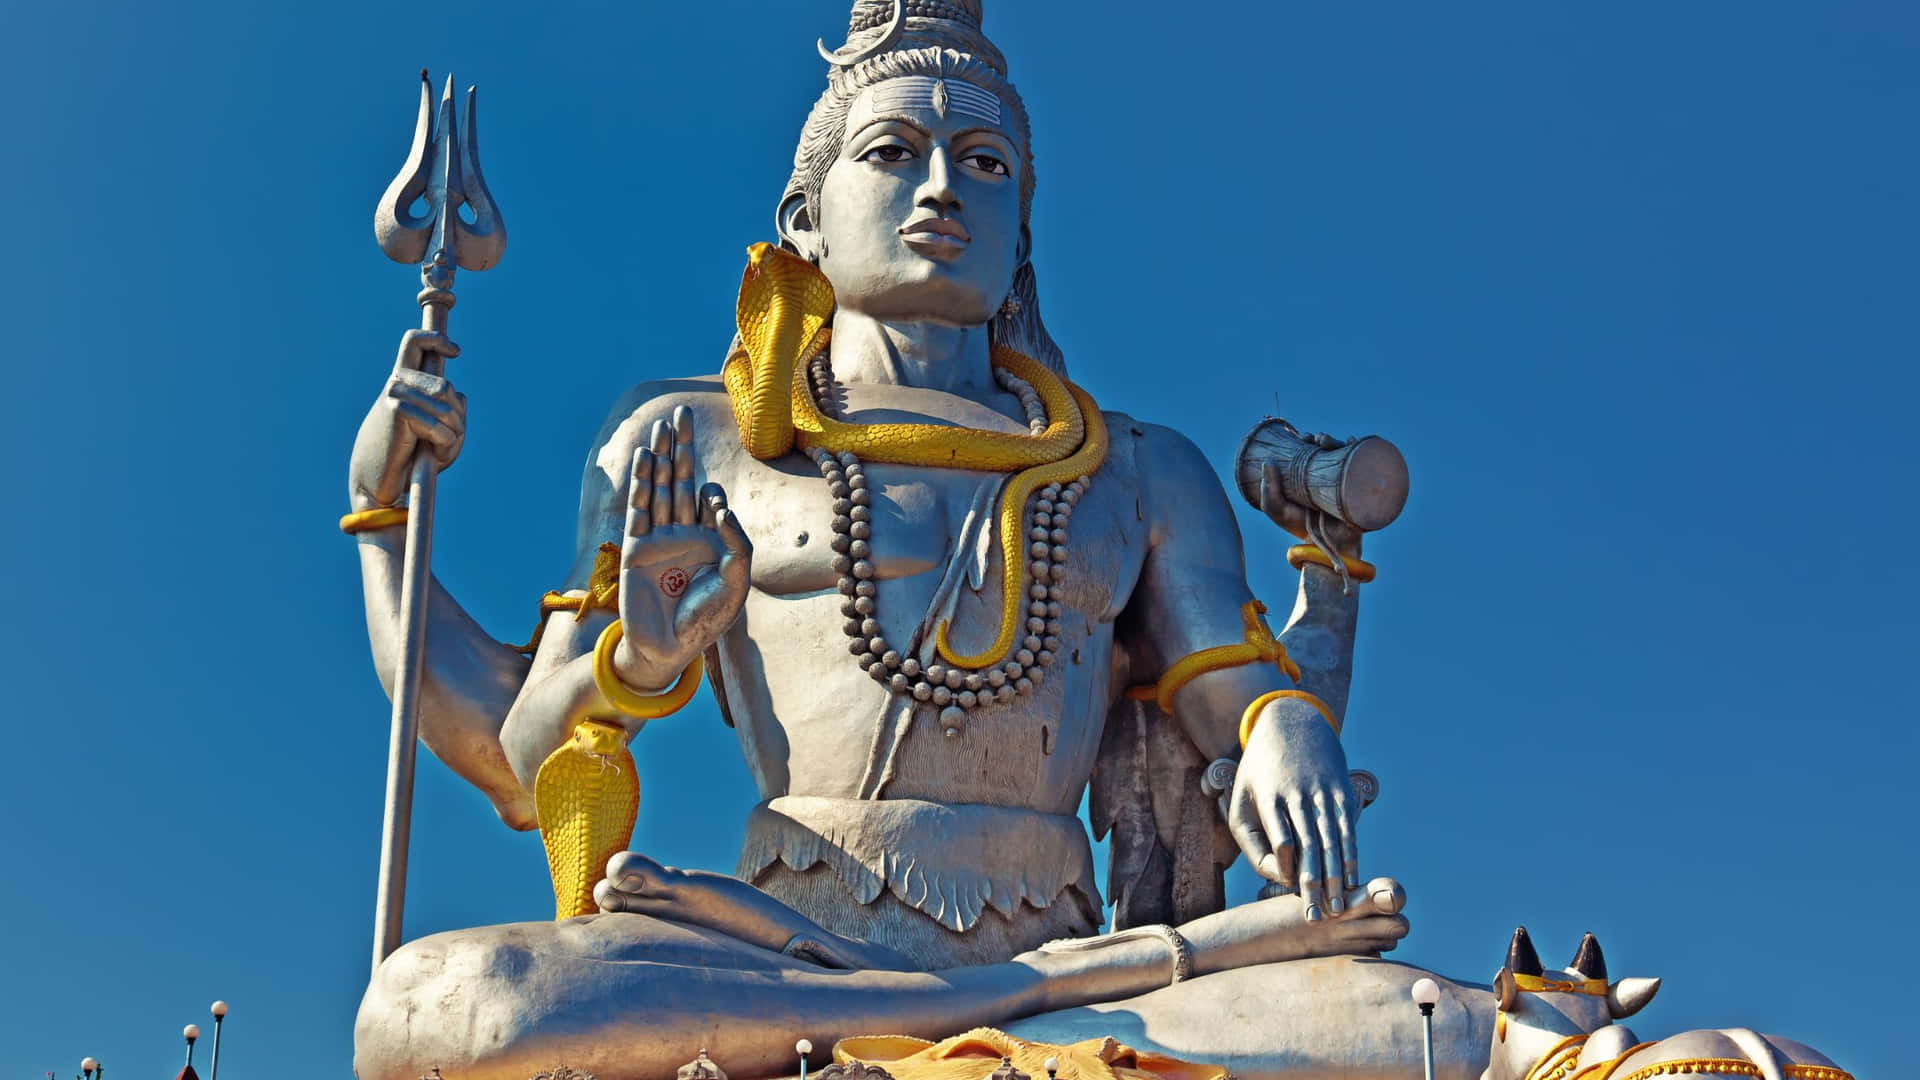 A Large Statue Of Lord Shiva Is In The Middle Of A Field